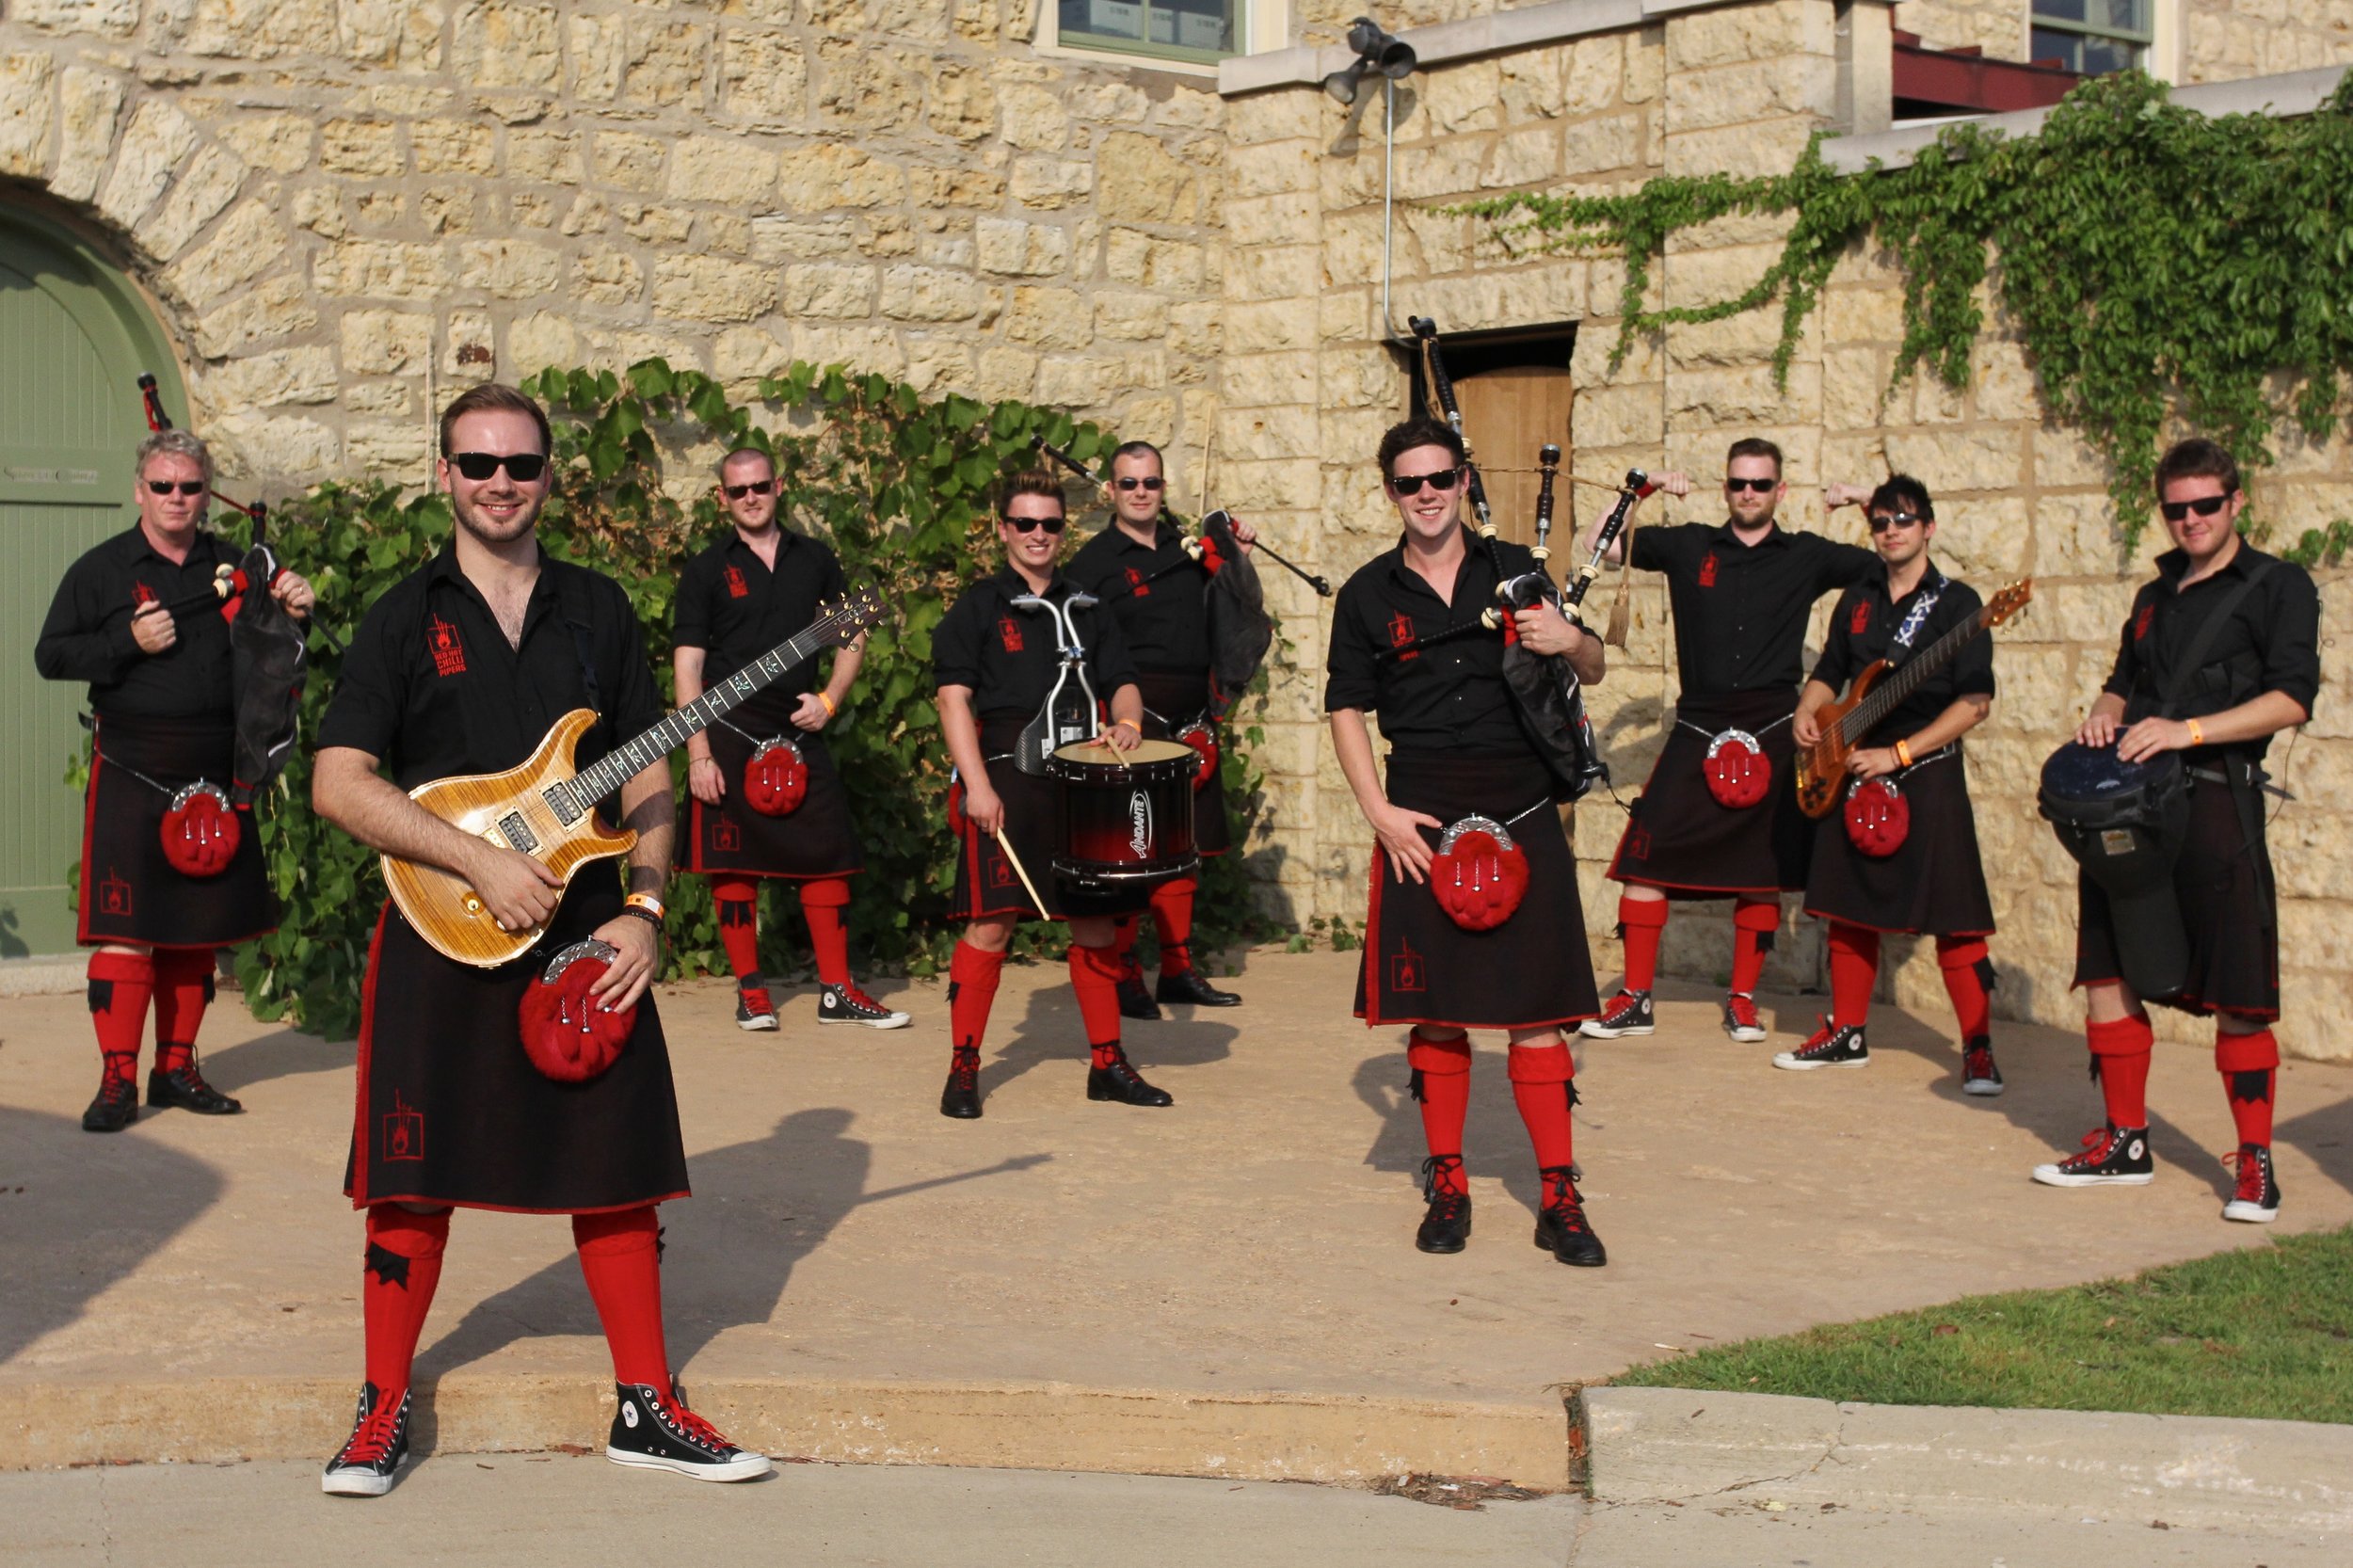 THE RED CHILLI PIPERS - Bagpipers who Rock — BICOASTAL PRODUCTIONS